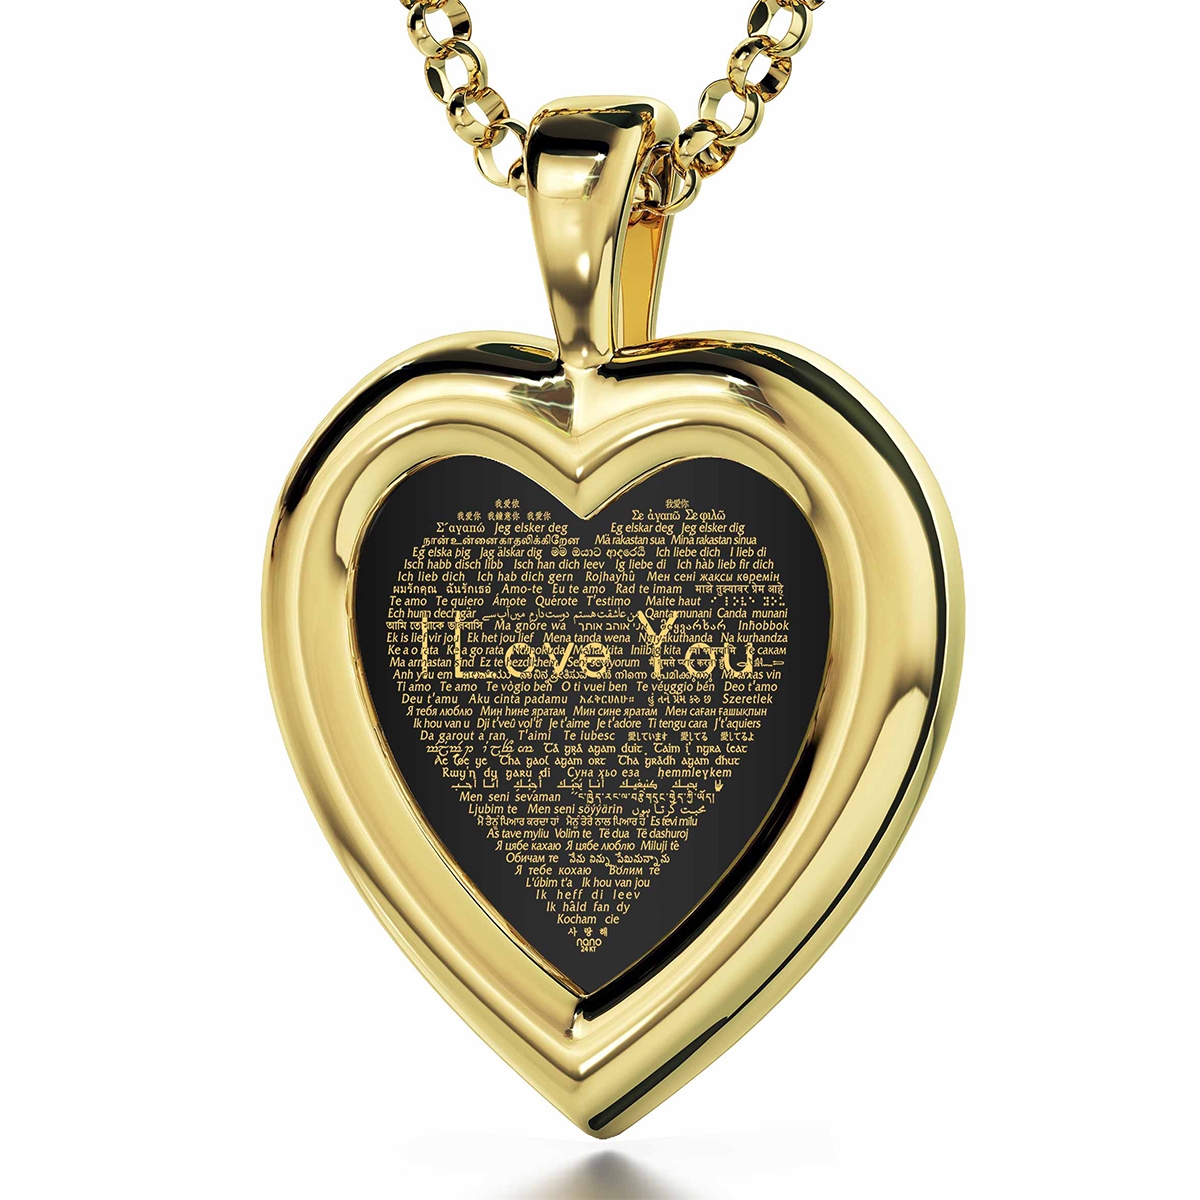 Gold Plated Heart Necklace - "I Love You" in 120 Languages - 1